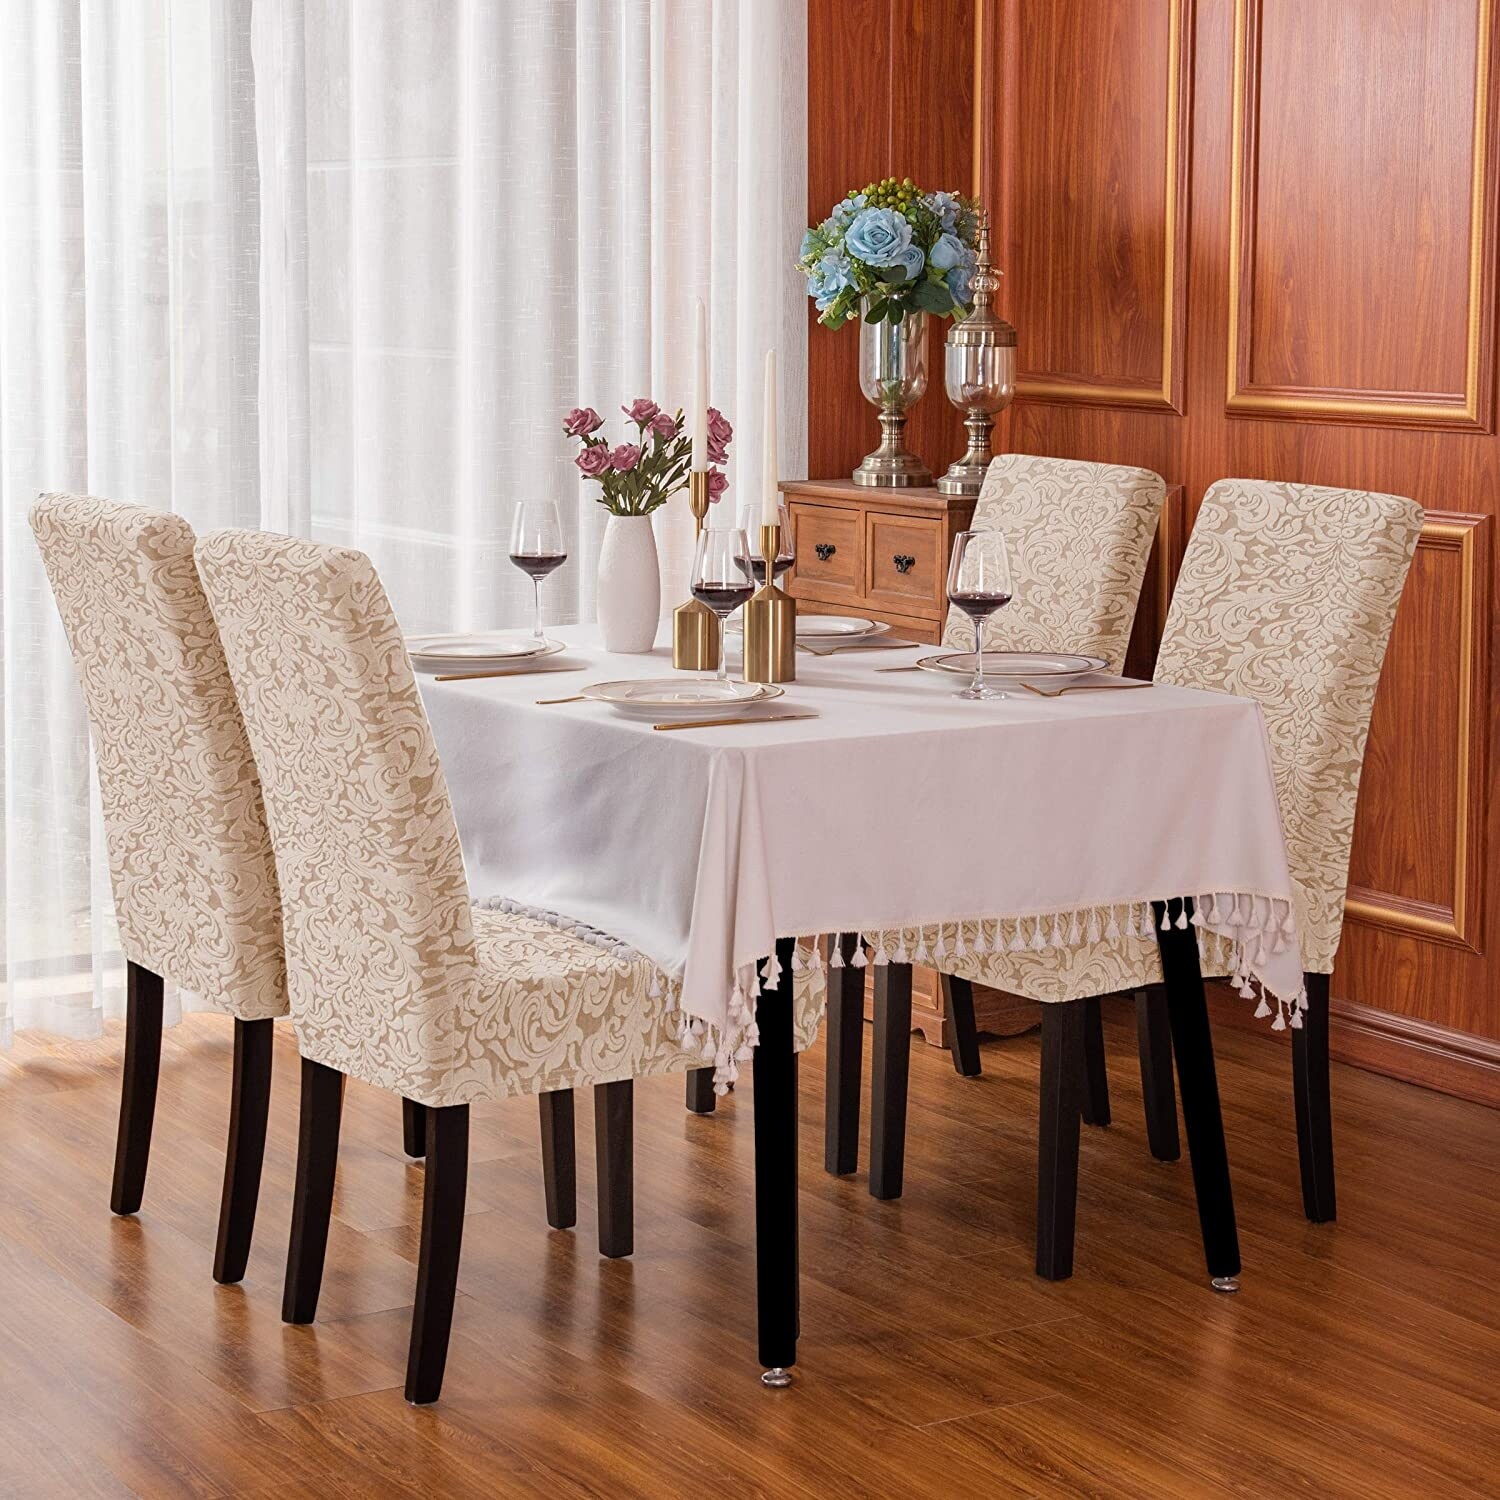 Spandex Stretch Dining Room Chair Cover Waterproof Jacquard Seat Covers 